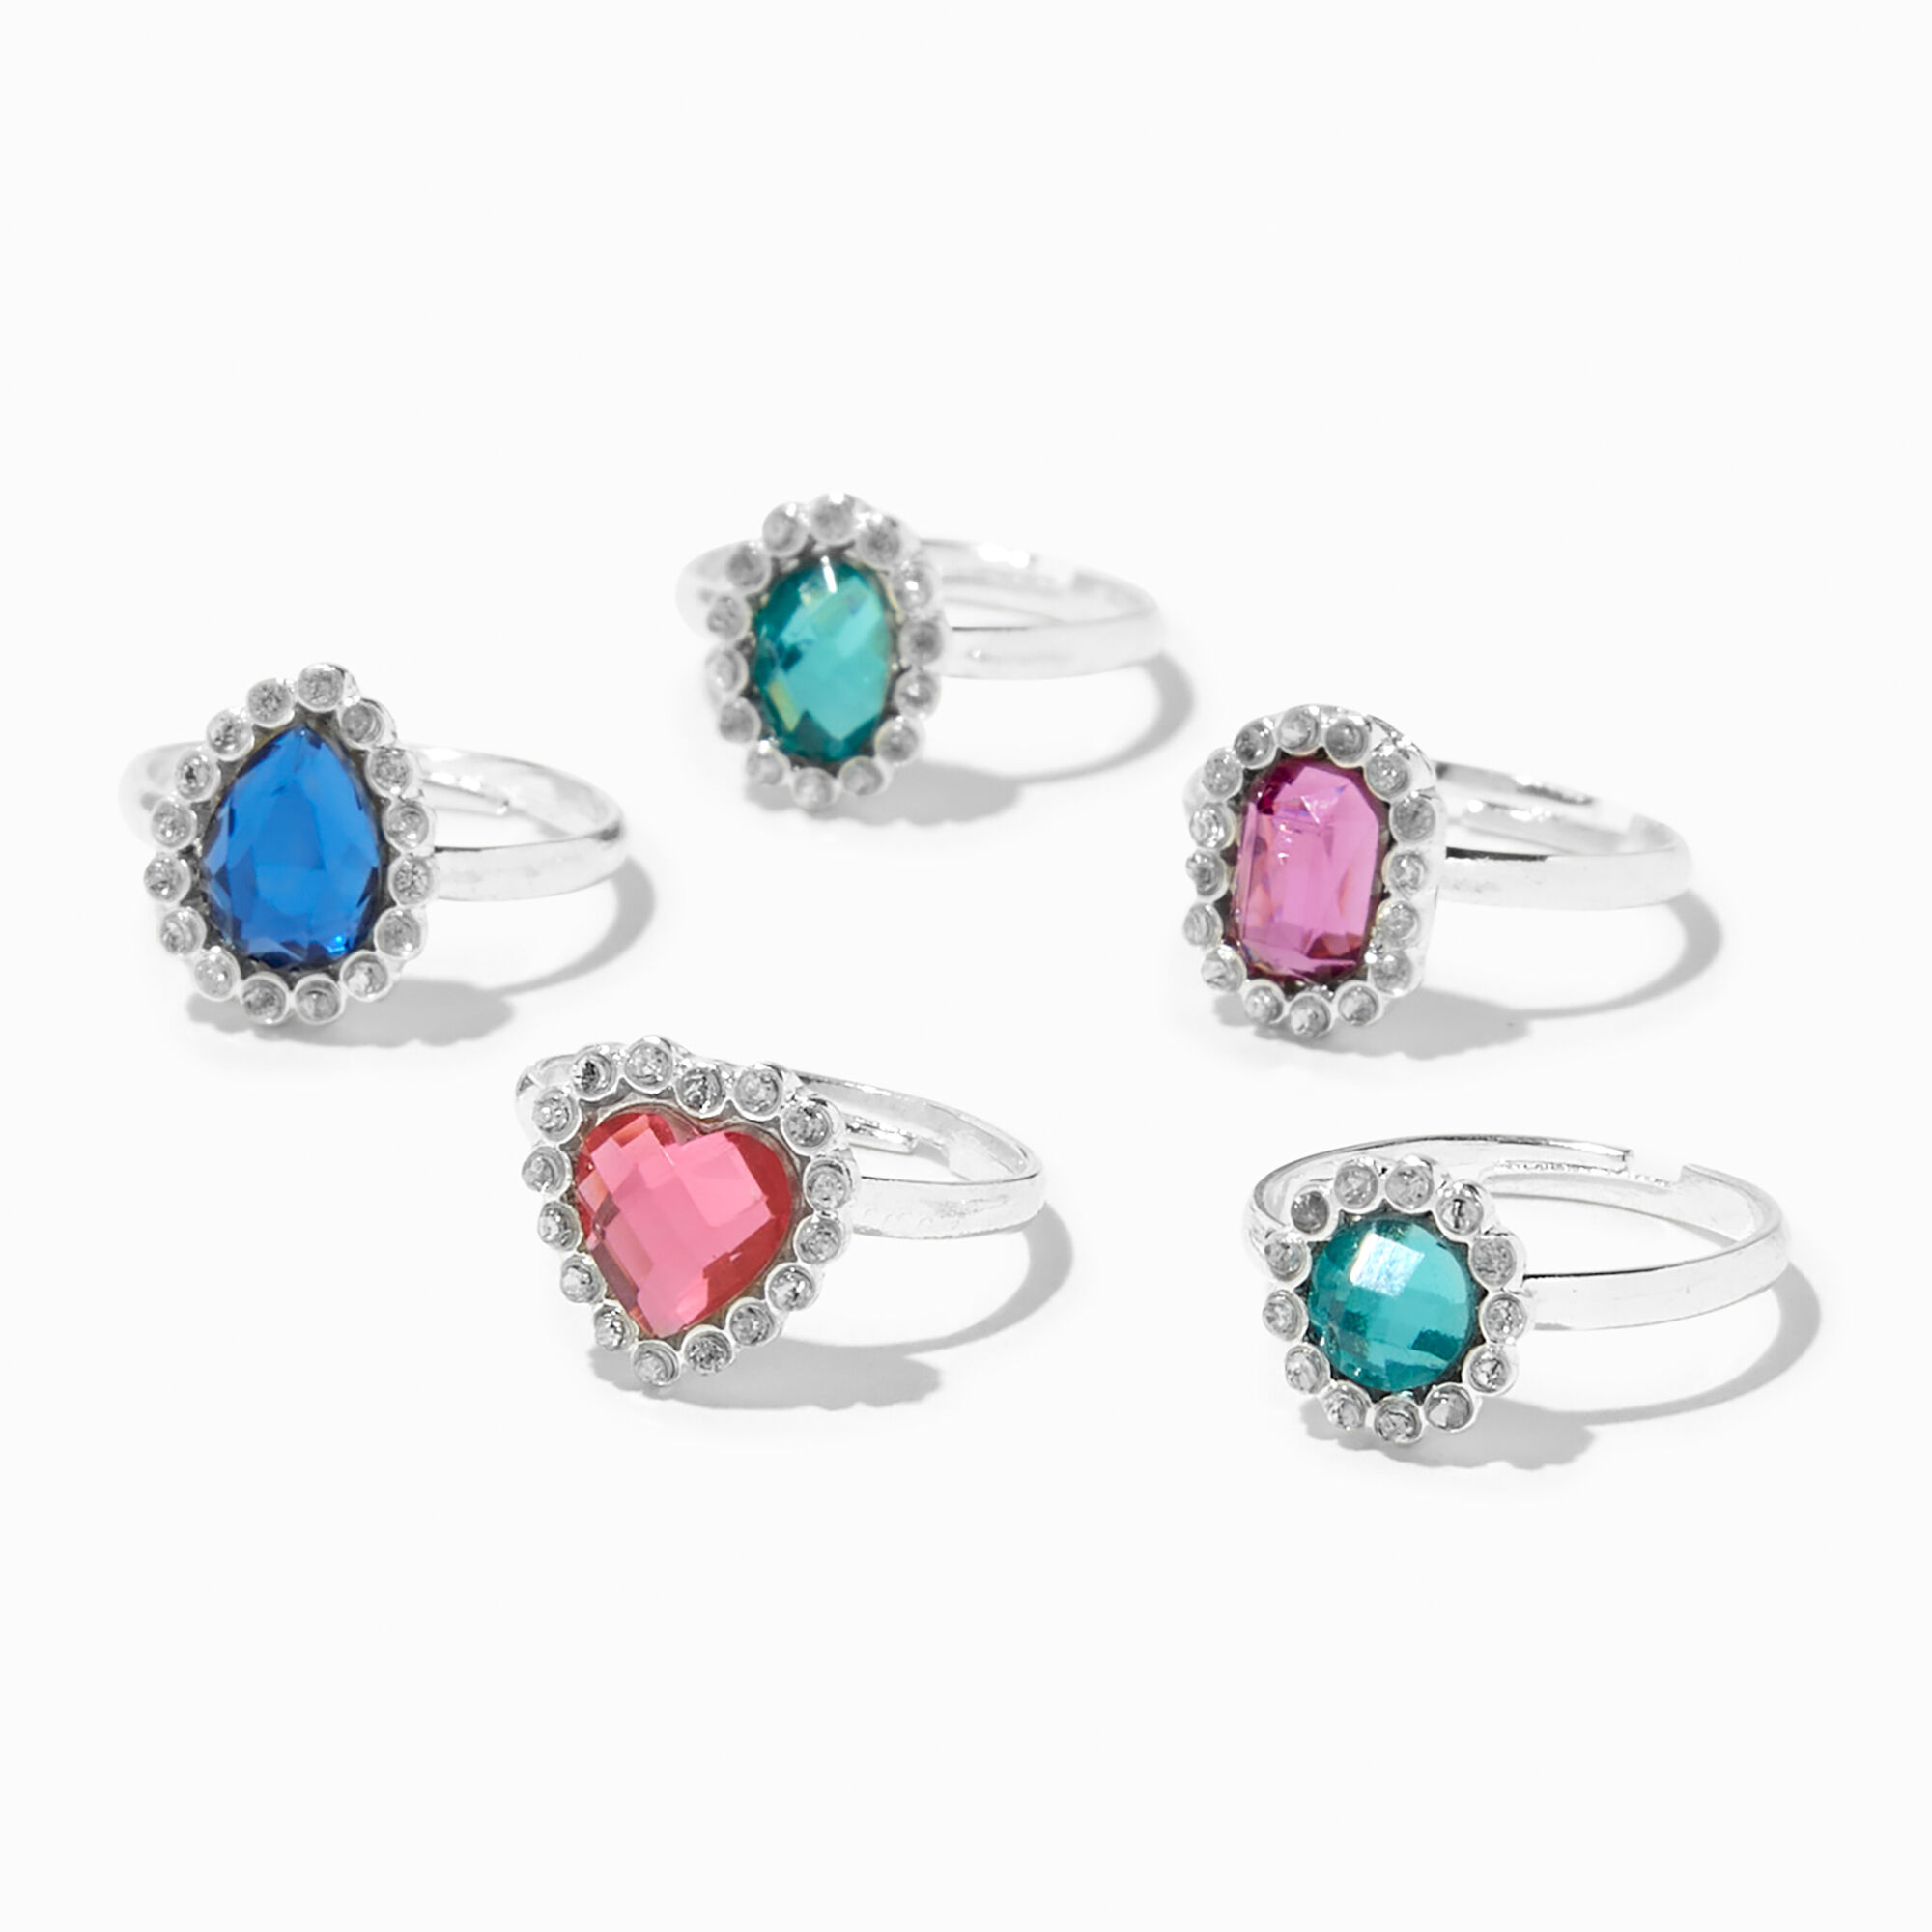 View Claires Club Jewel Tone Rhinestone Rings 5 Pack Silver information